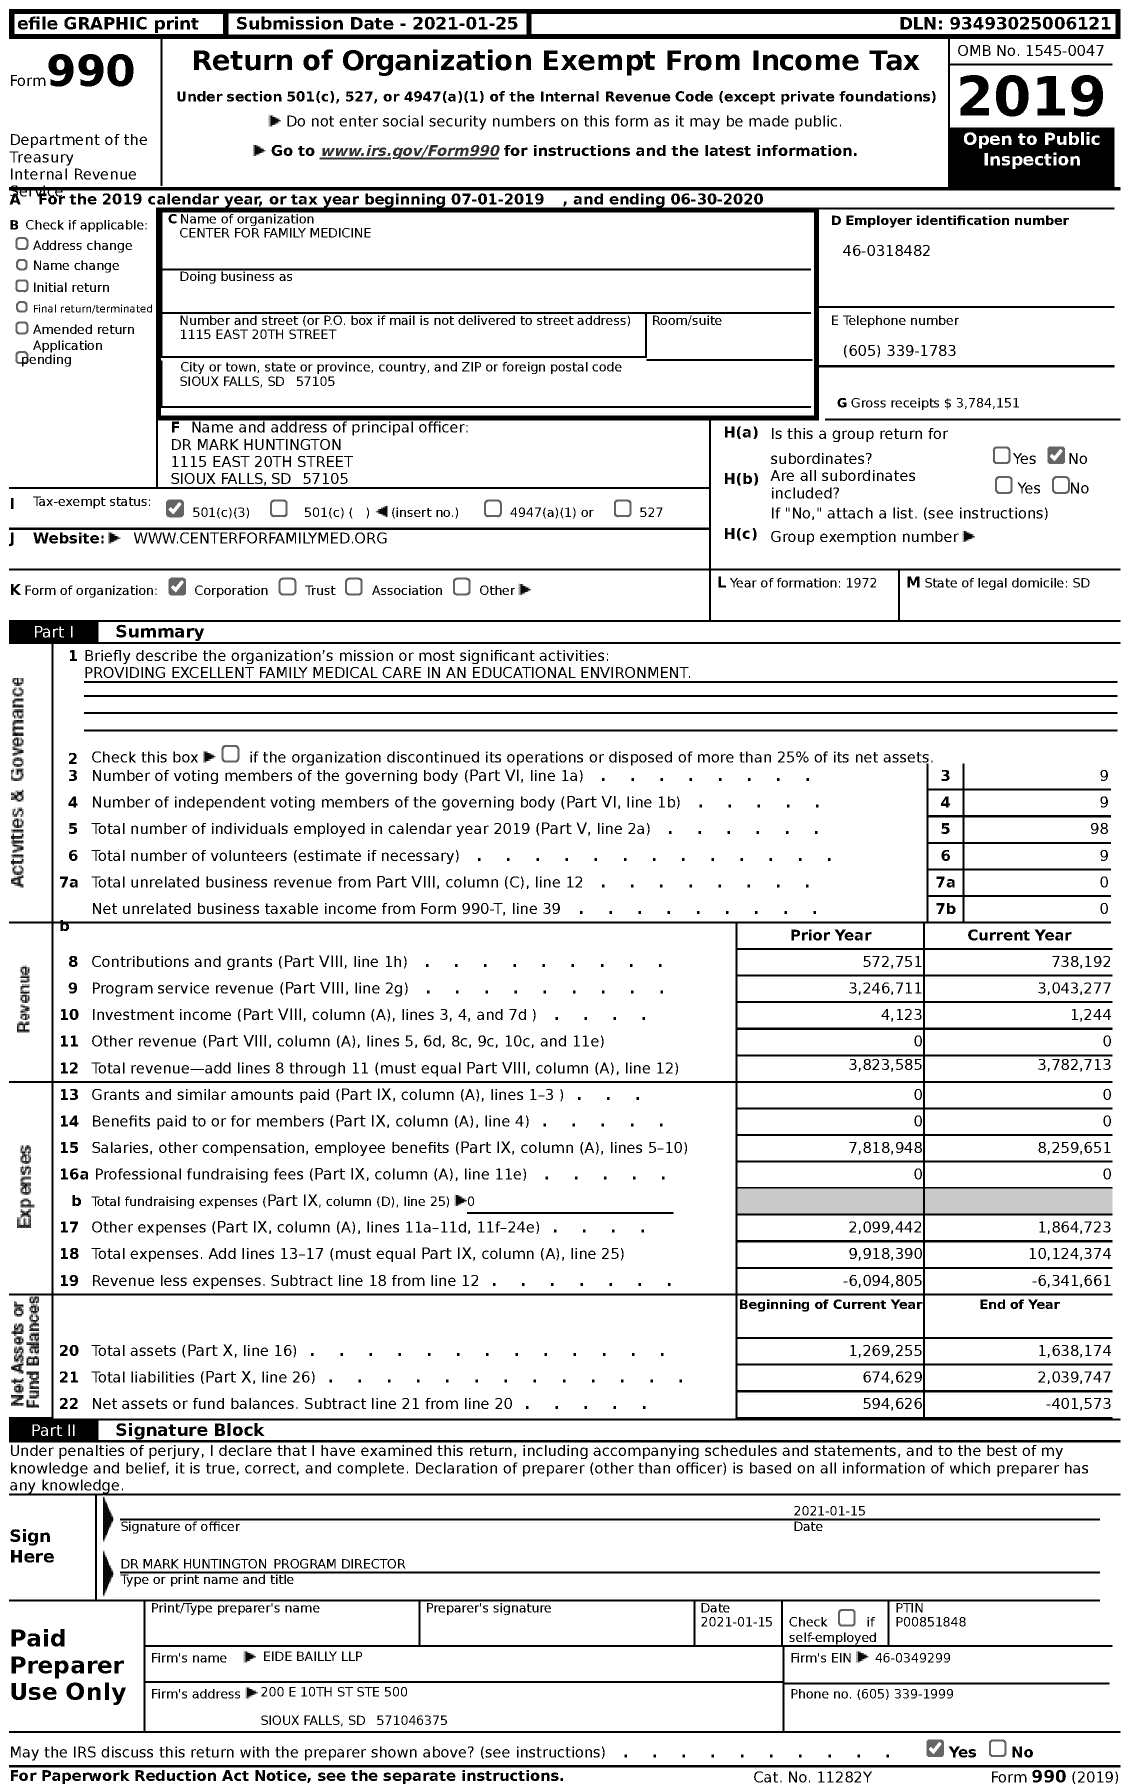 Image of first page of 2019 Form 990 for Center for Family Medicine (CFM)